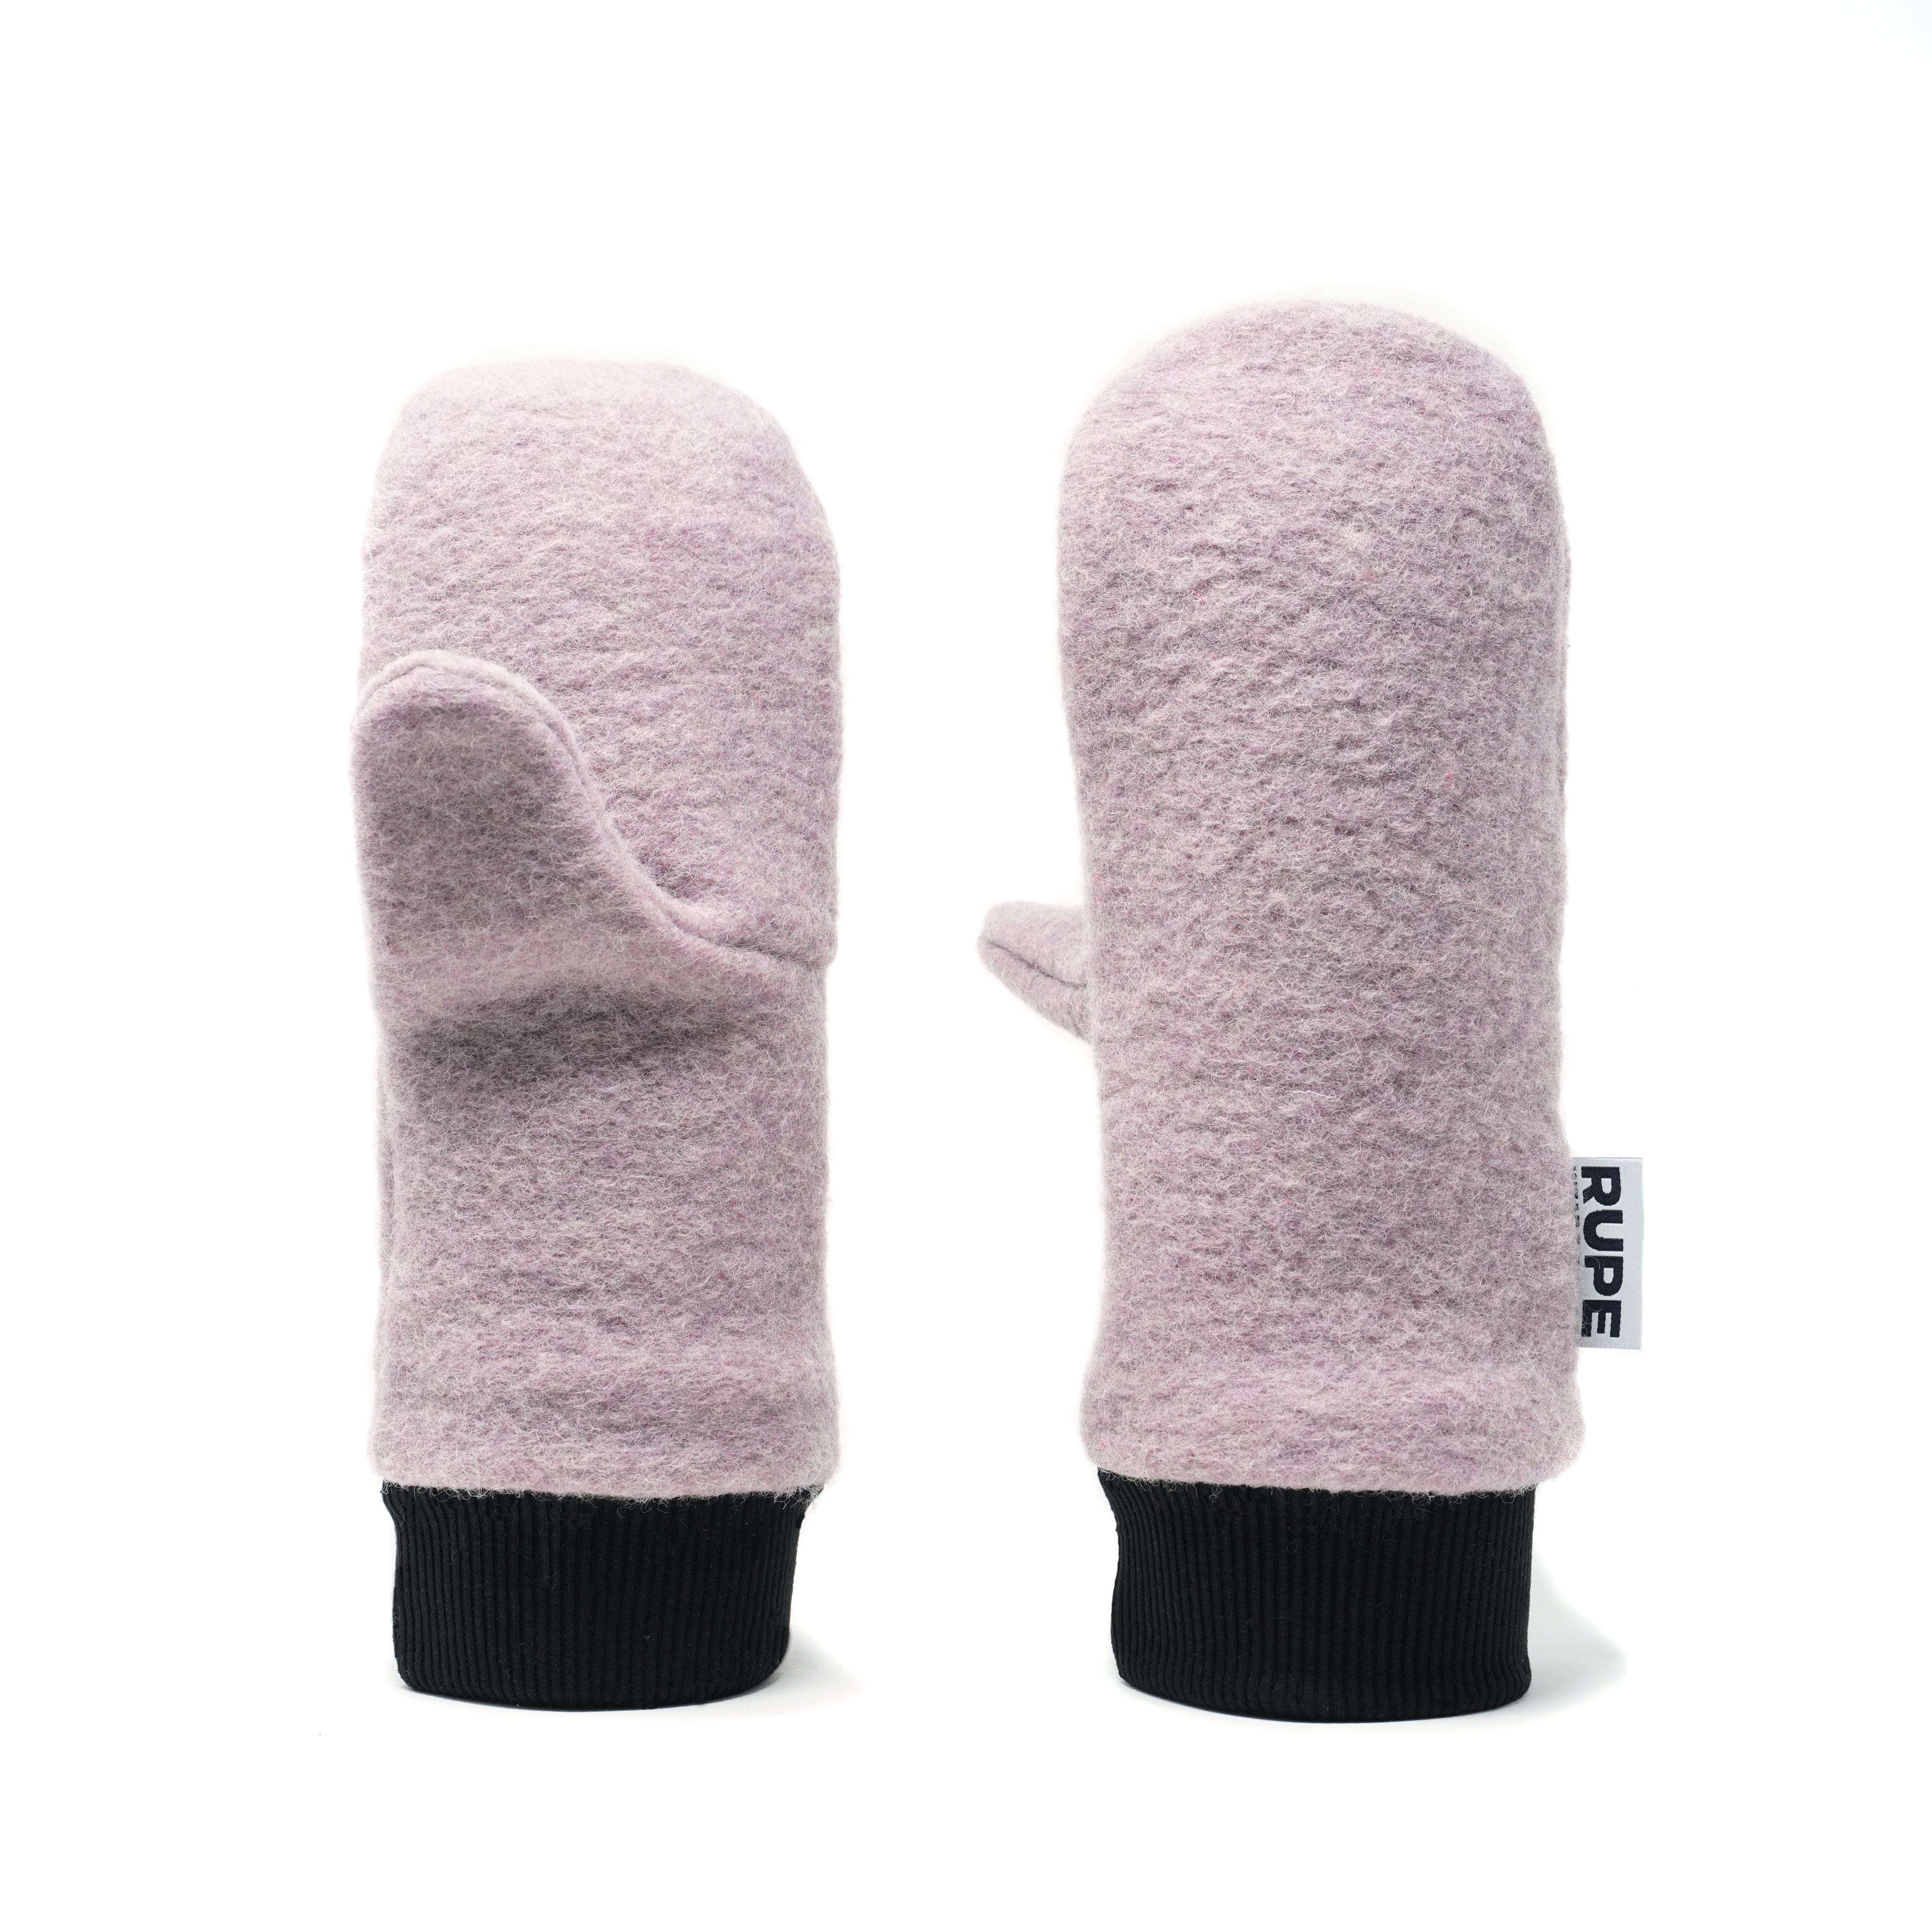 MITTENS - LIMITED EDITION - Pink 